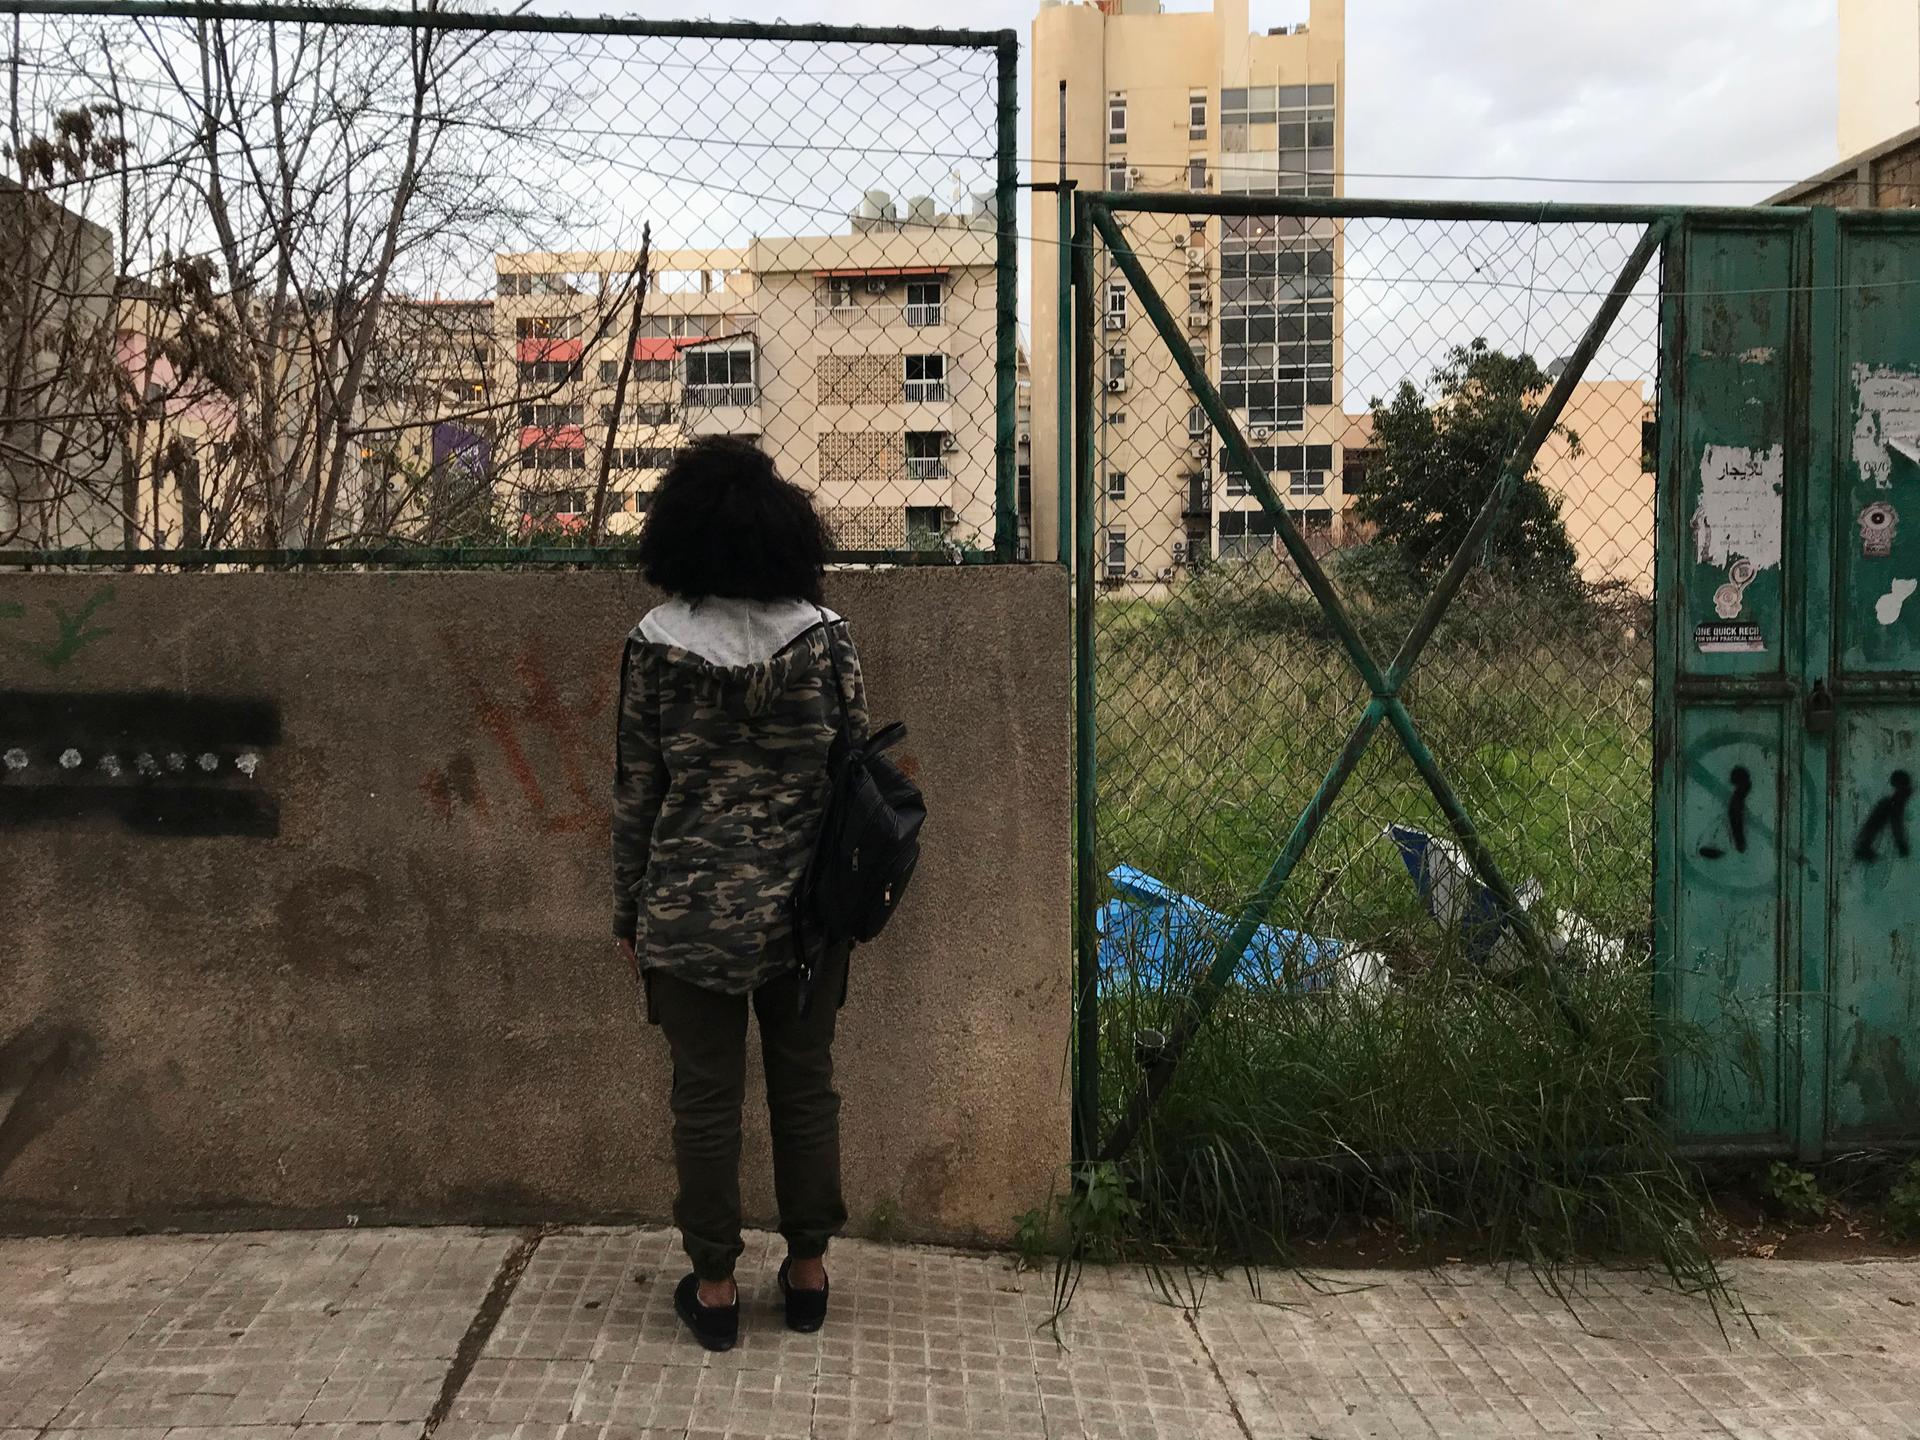 A young woman stands outside looking out at apartment buildings